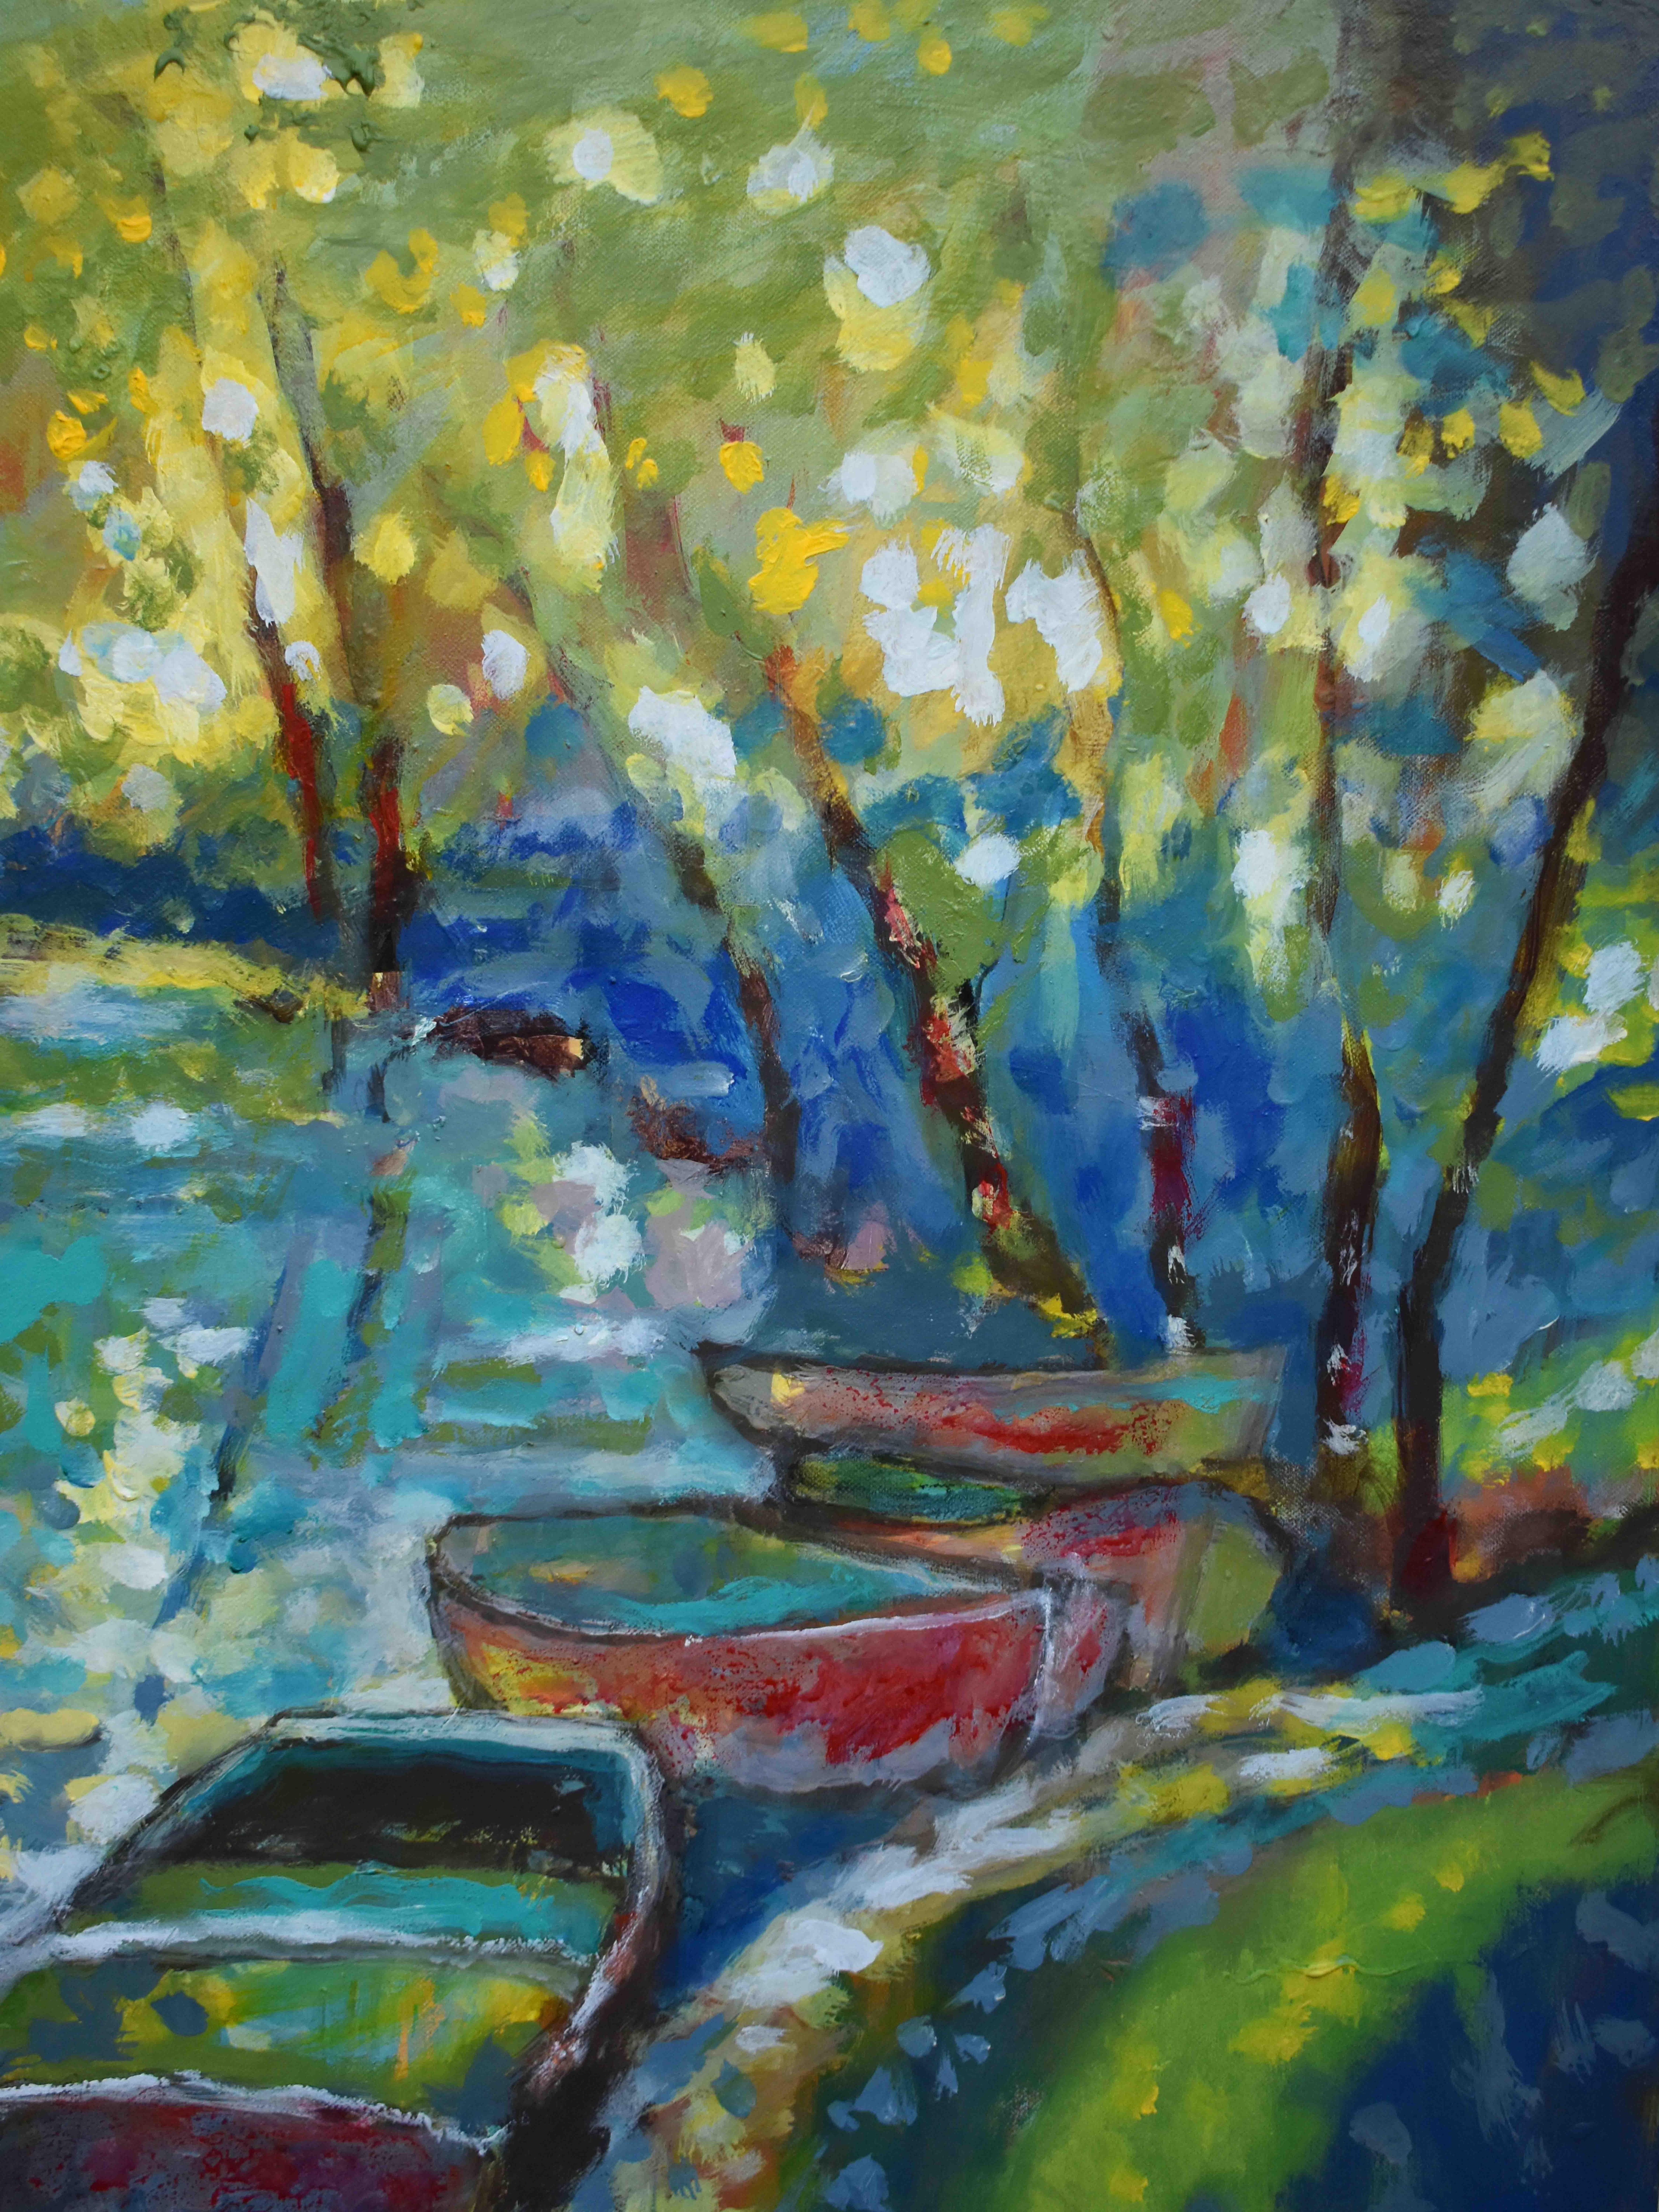 <p>Artist Comments<br>Summer boats are docked by the edge of a small pond on a magical summer evening. Artist Kip Decker focused on the light filtering through the trees down to the scene below. Twinkling lights reflect on the boats and water's